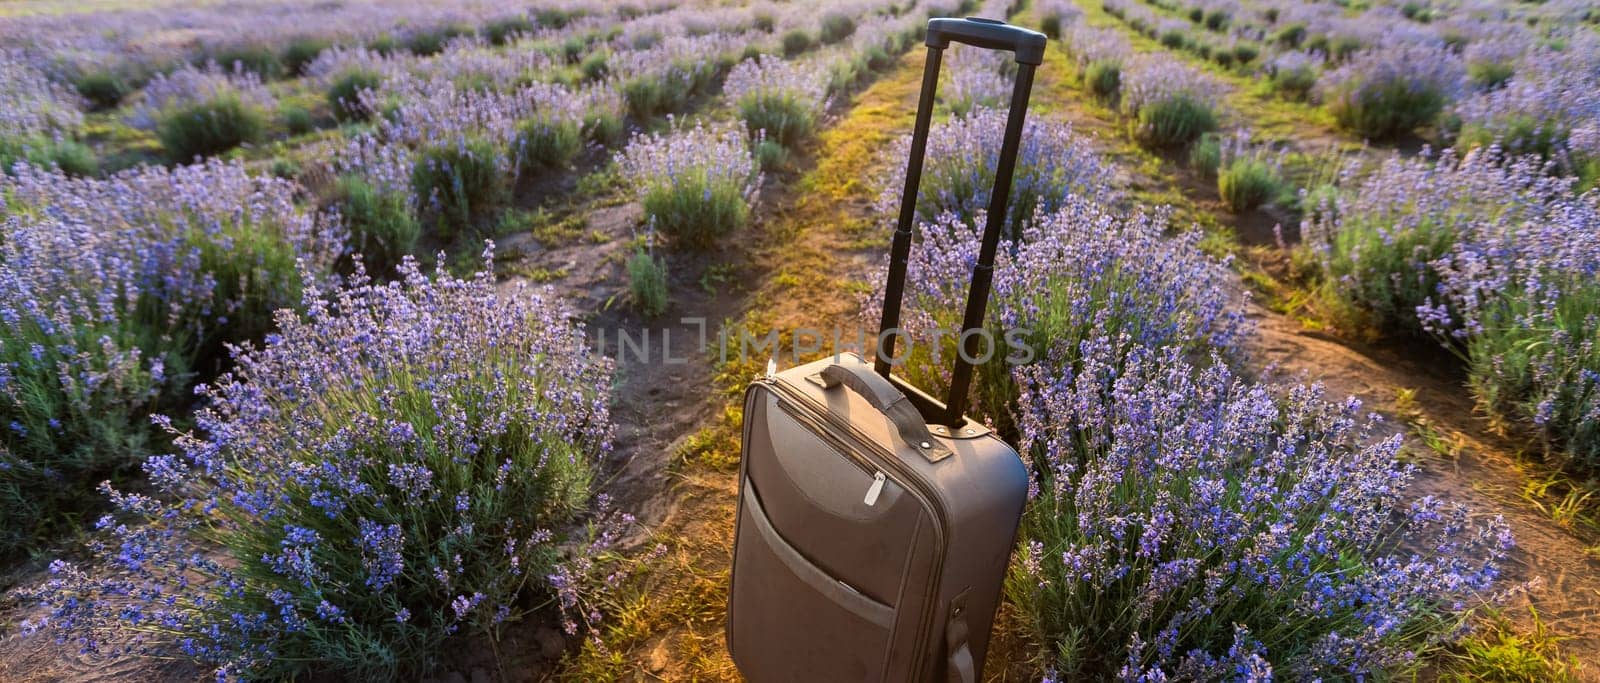 suitcase in lavender field, travel lifestyle concept. by Andelov13